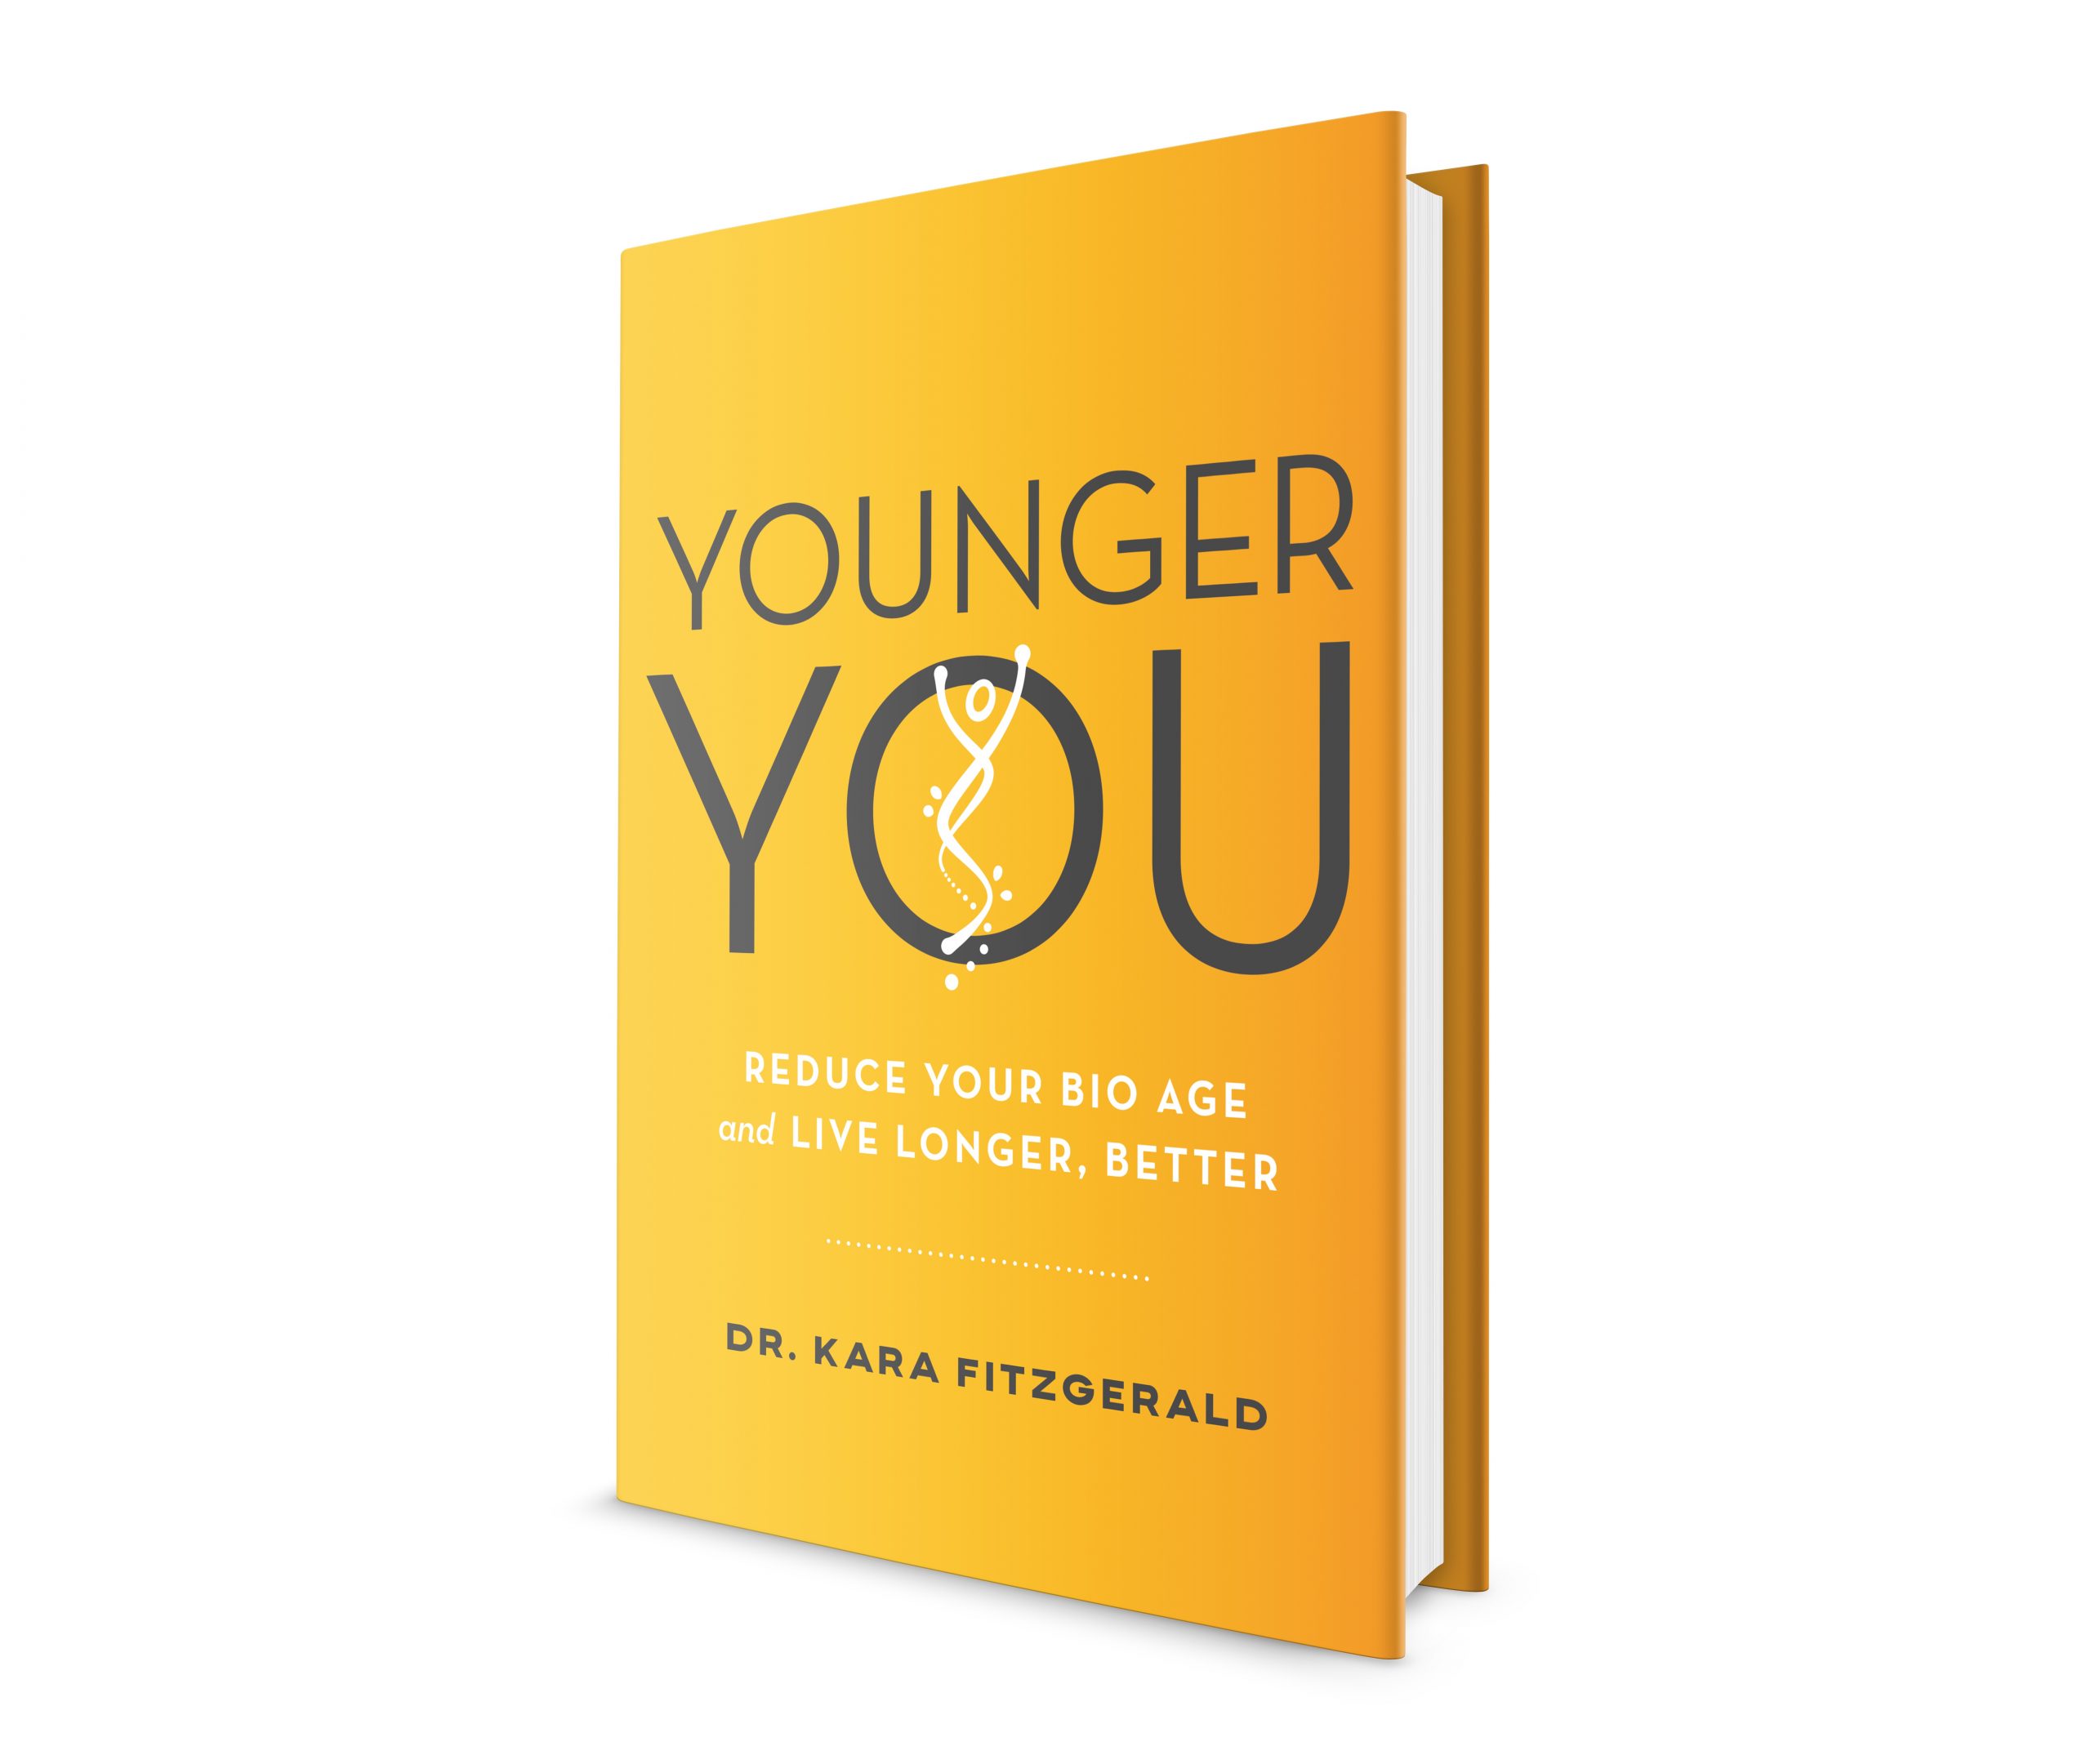 Dr. Kara Fitzgerald Helps Improve Health and Turns Back the Biological Clock With 'Younger You' Book